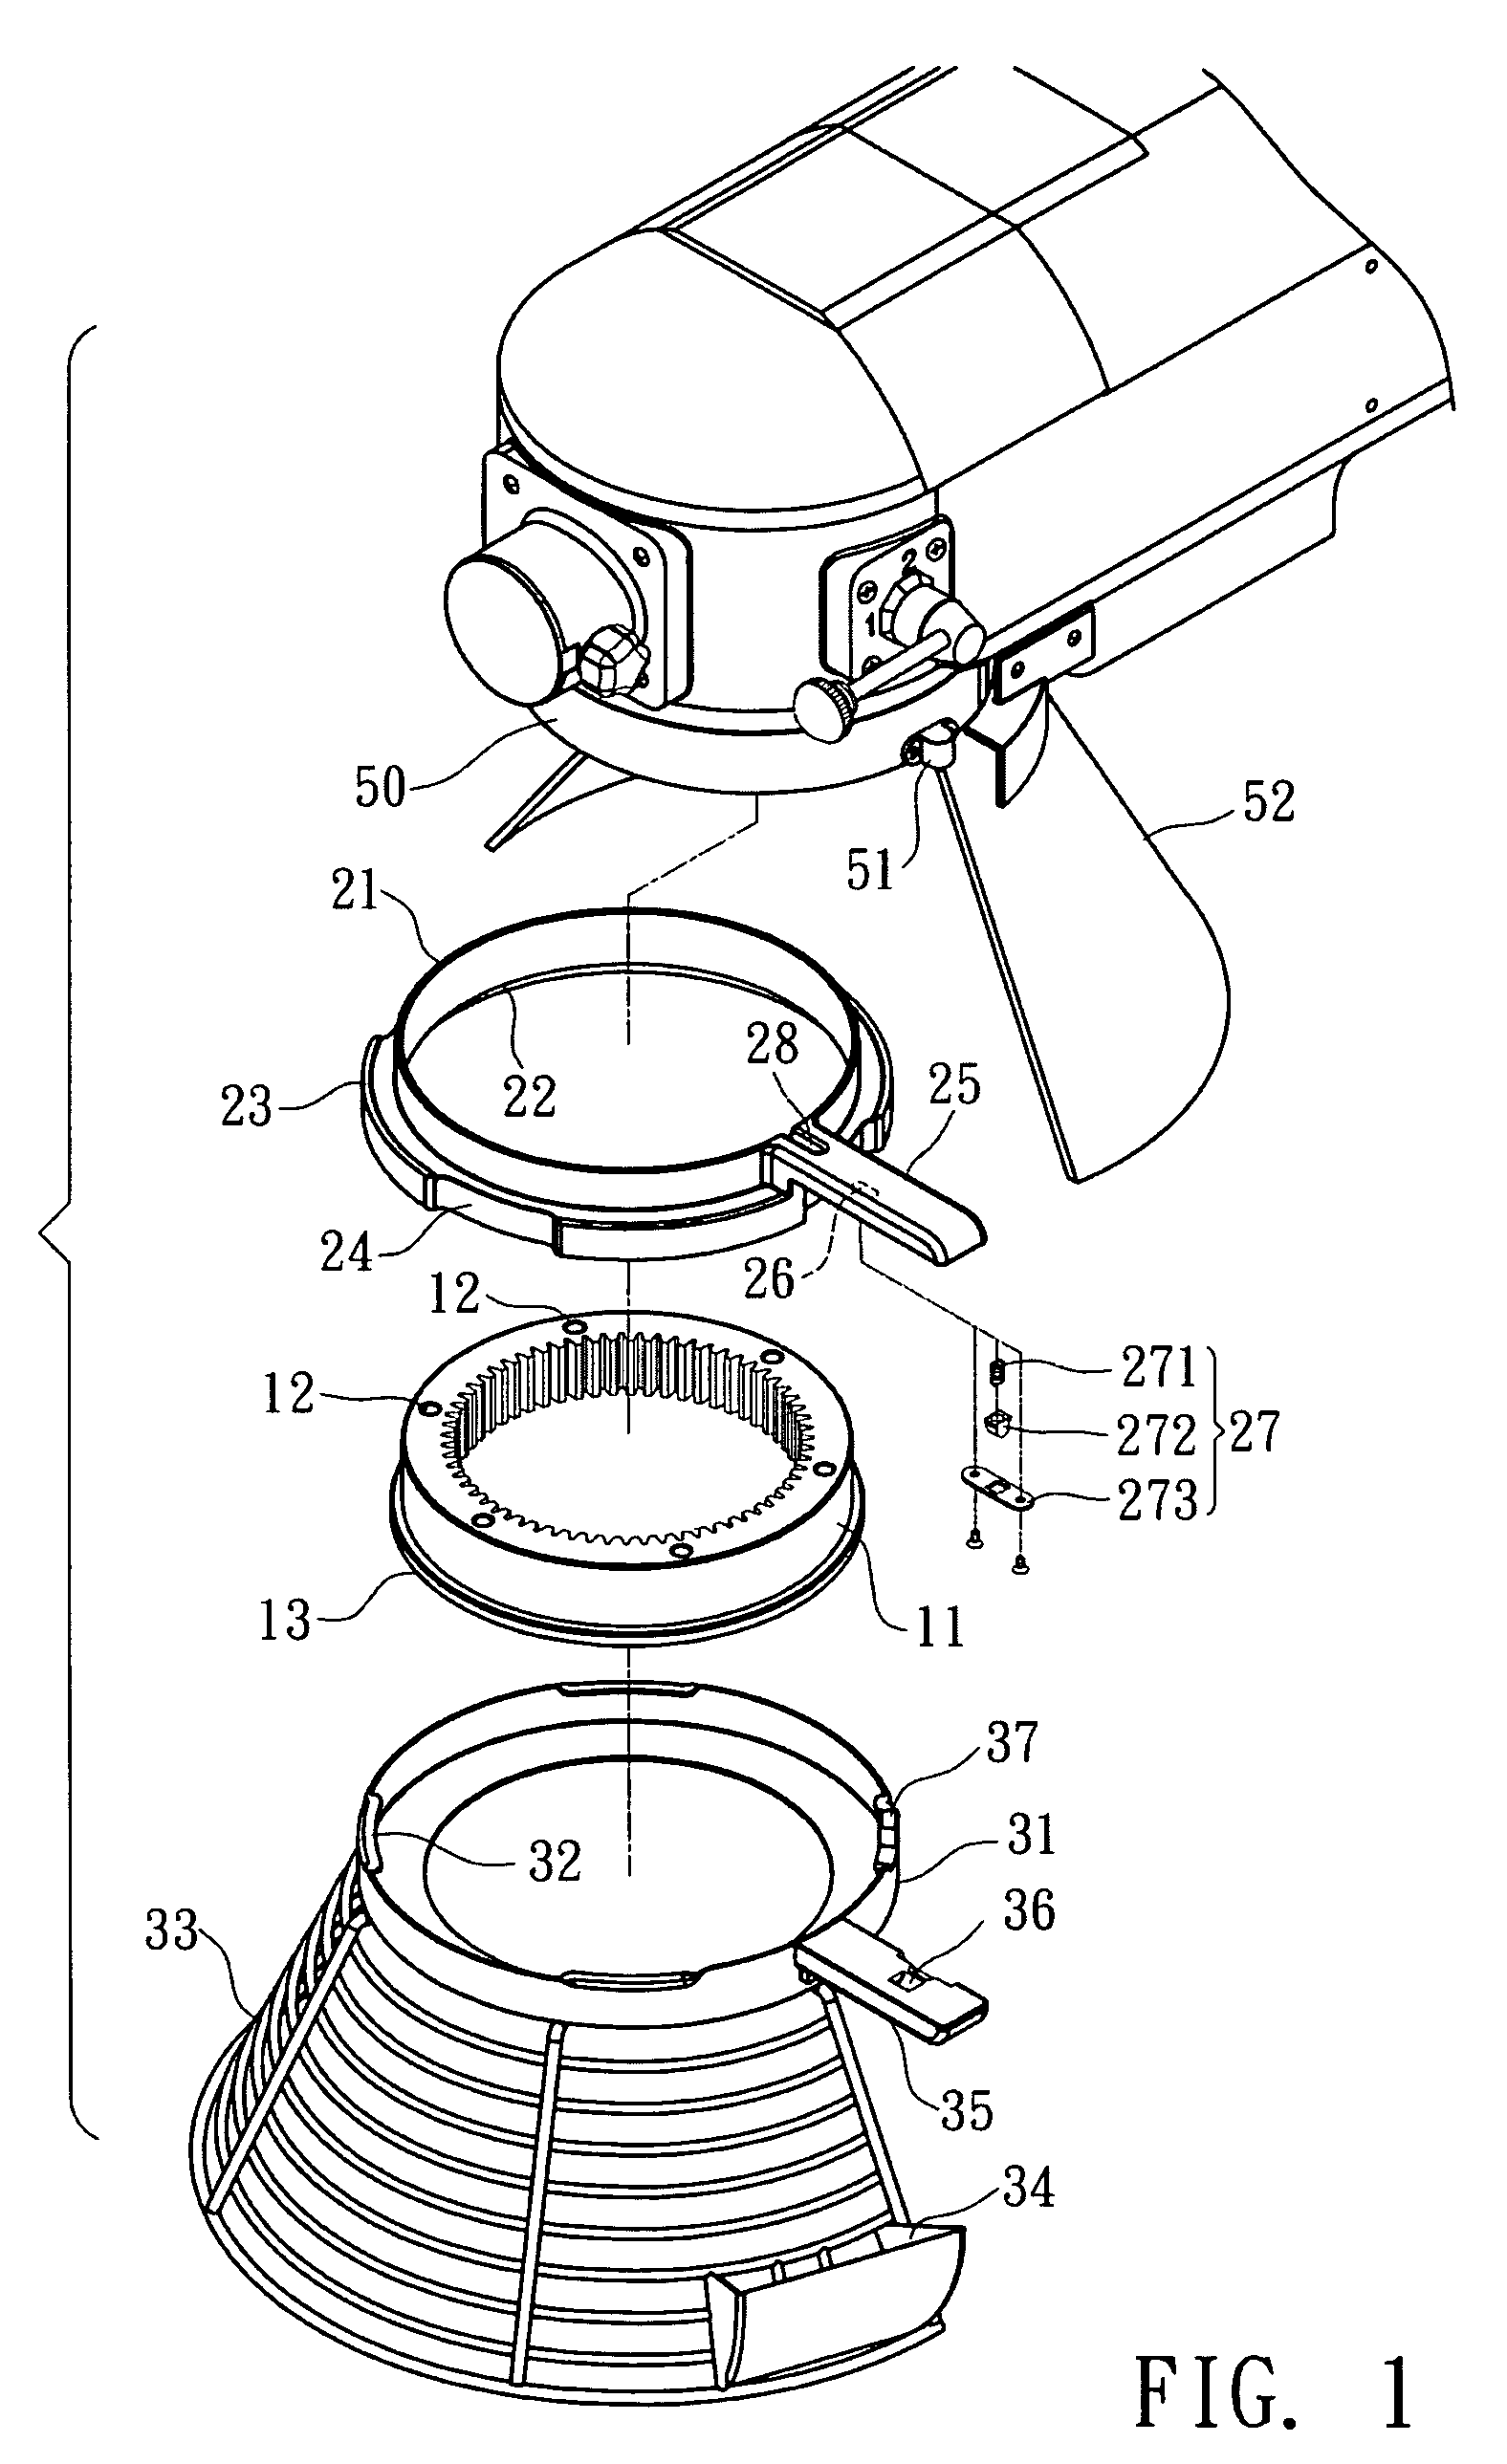 Covering structure of a mixer